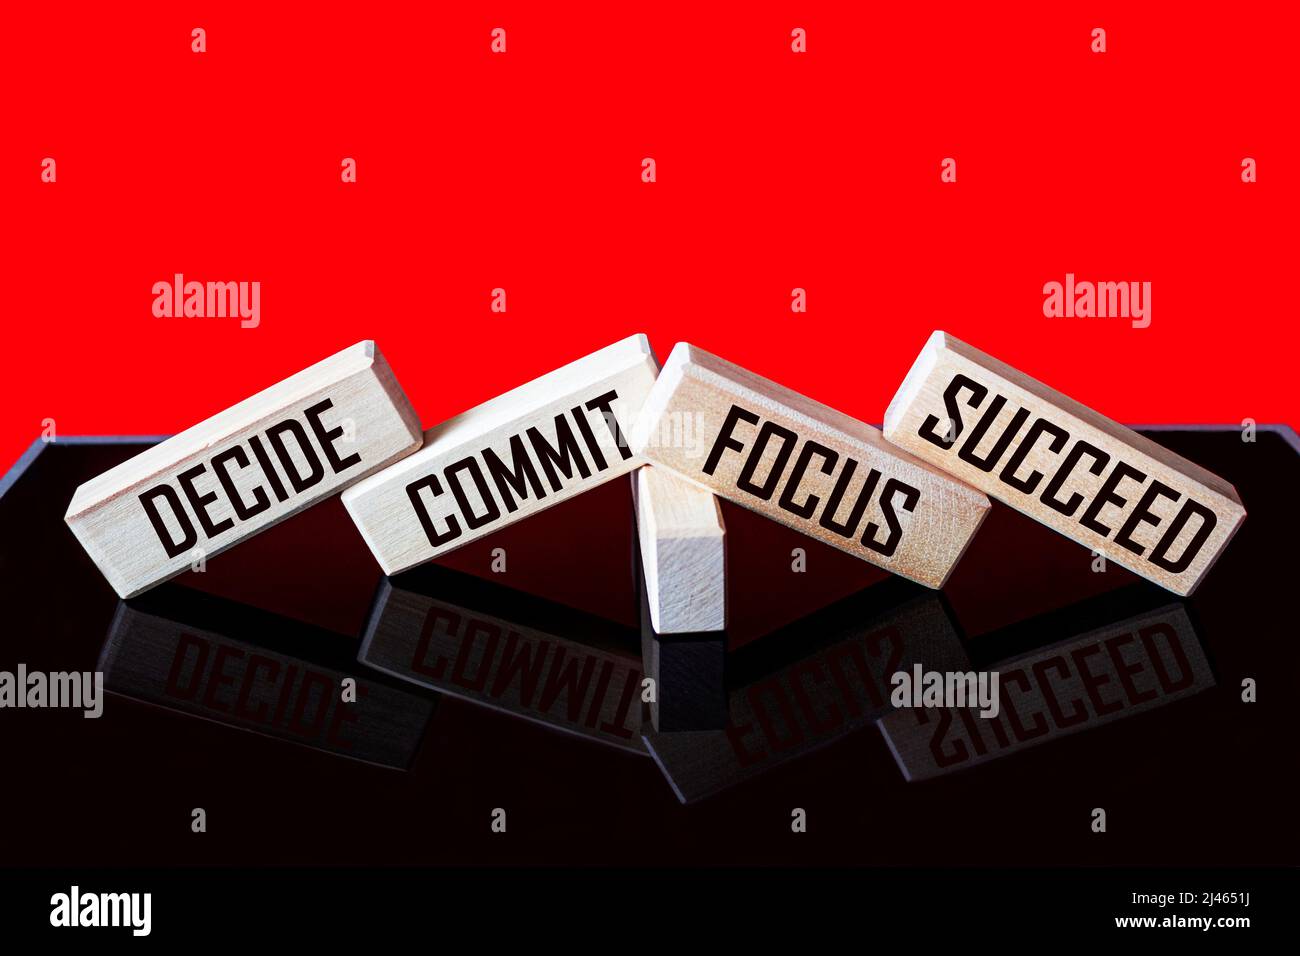 Motivational and inspirational quotes - Decide, commit, focus, succeed on wooden blocks and red black background Stock Photo